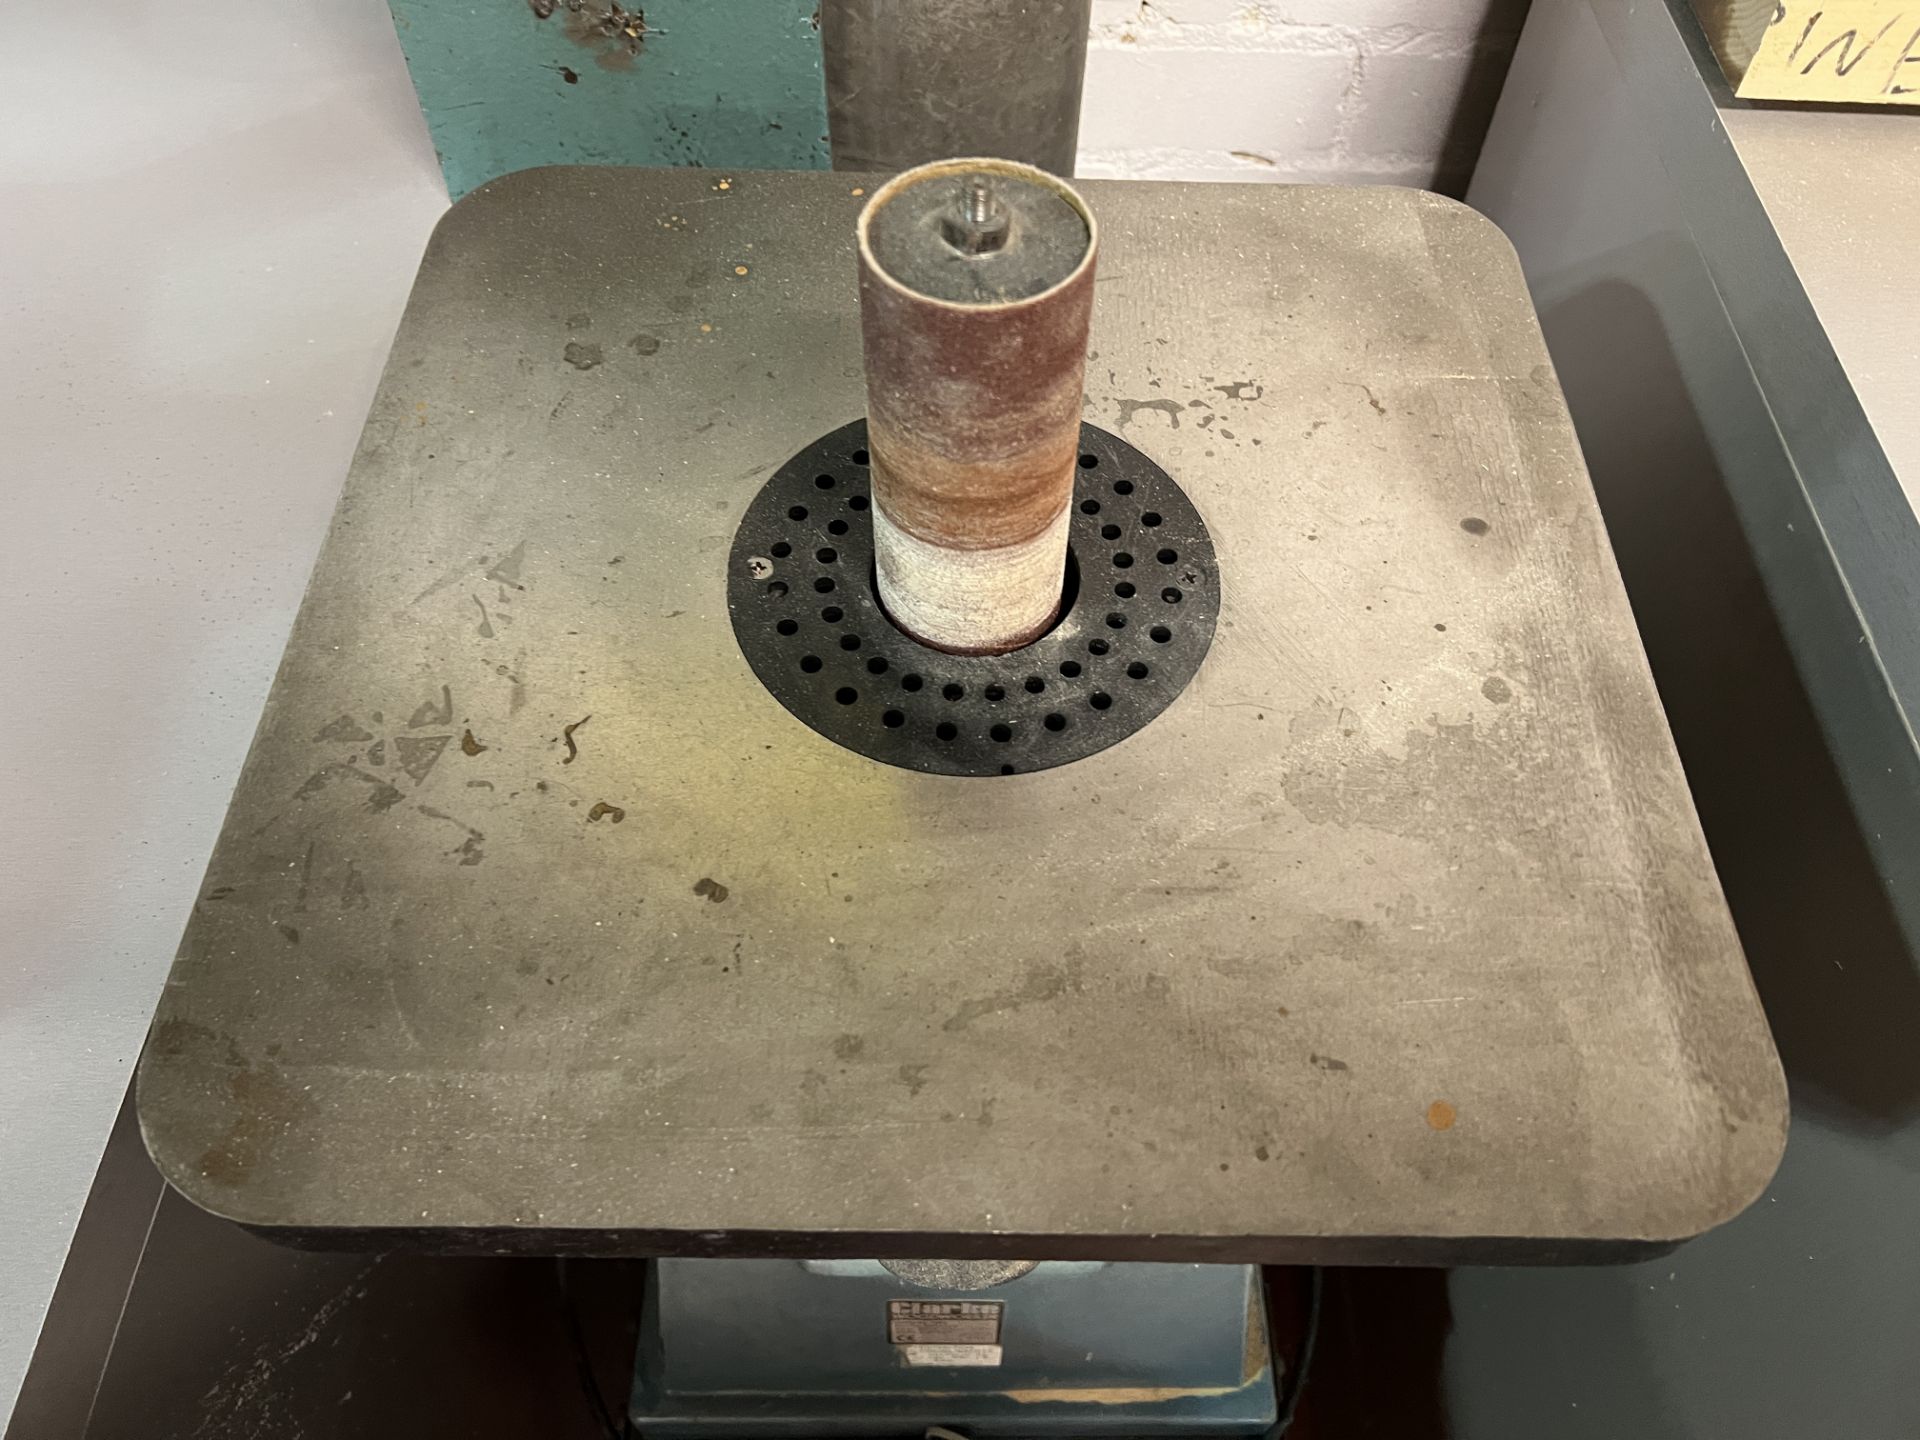 Clarke VRS1 pedestal rotary grit sander, maximum spindle speed 1400 r.p.m, 230 volts, location Manor - Image 4 of 5